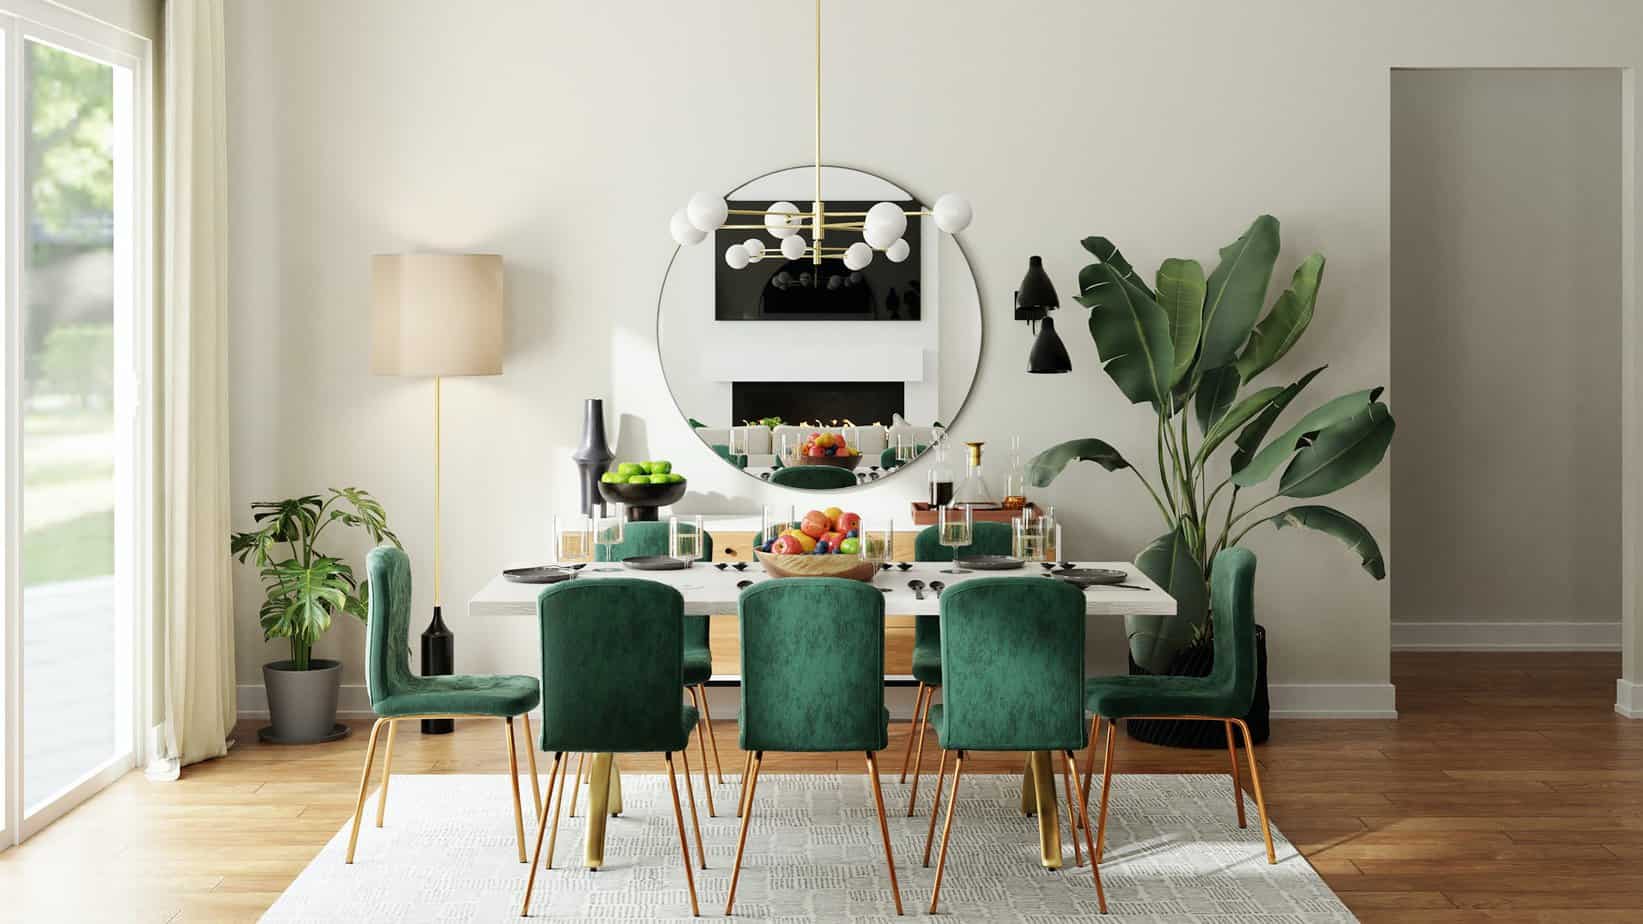 What can’t be missing from a dining room?